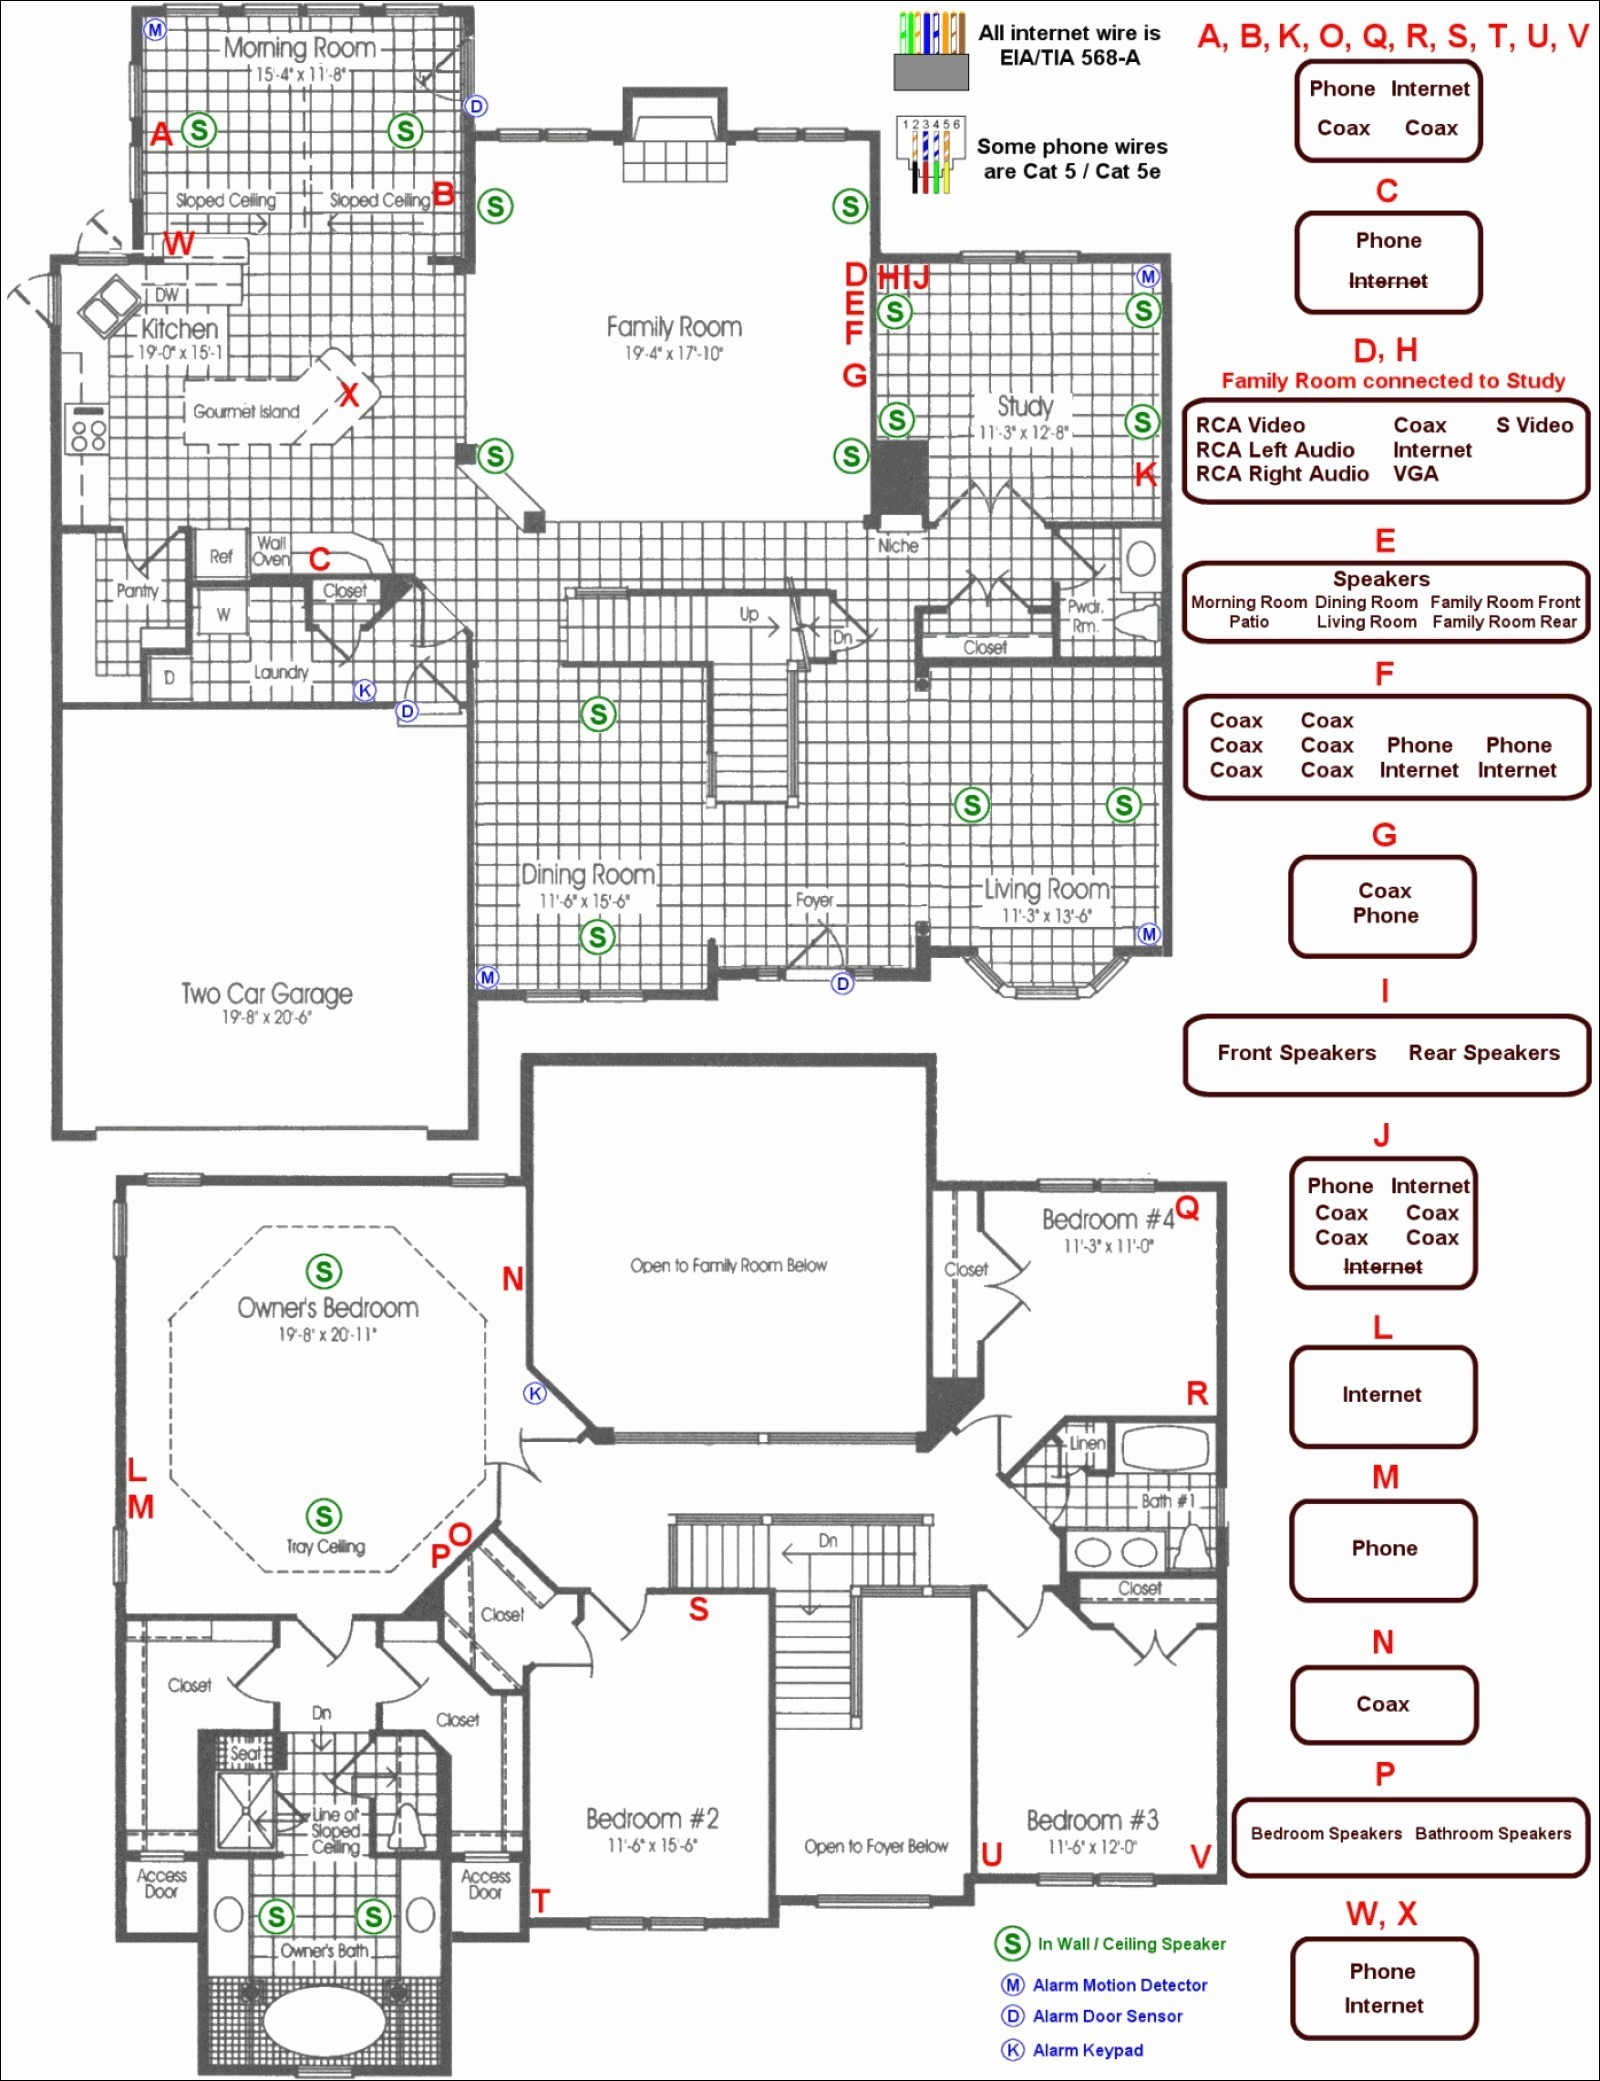 Whole House Audio System Wiring Diagram - Panoramabypatysesma - Whole House Audio System Wiring Diagram